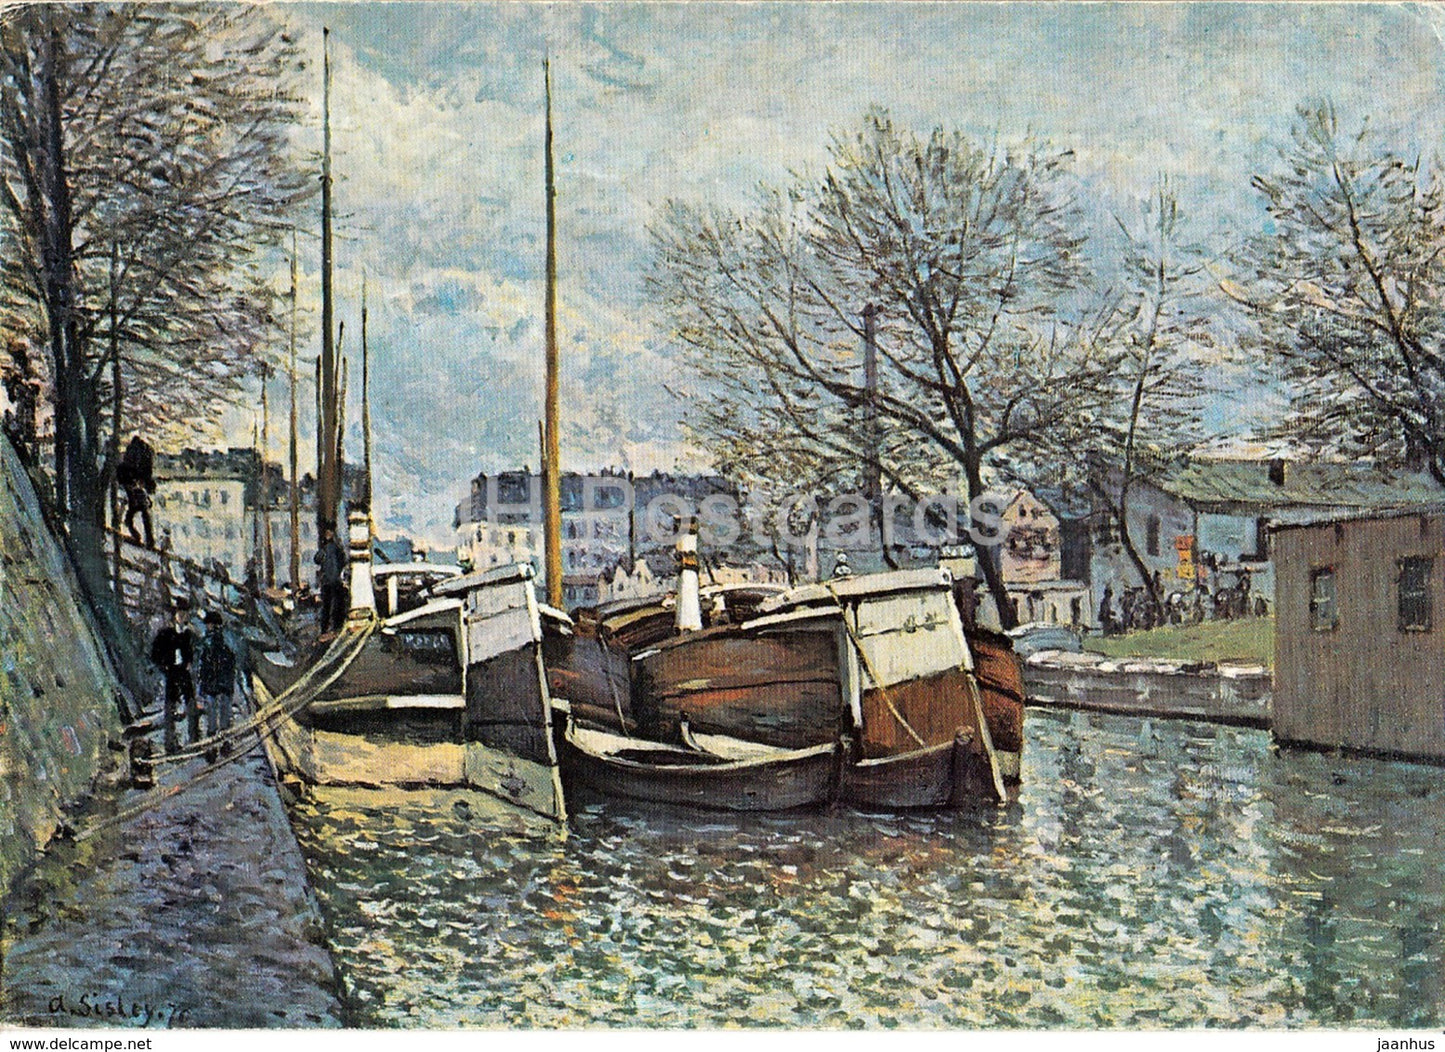 painting by Alfred Sisley - Le Canal St Martin a Paris - boat - art - Switzerland - unused - JH Postcards